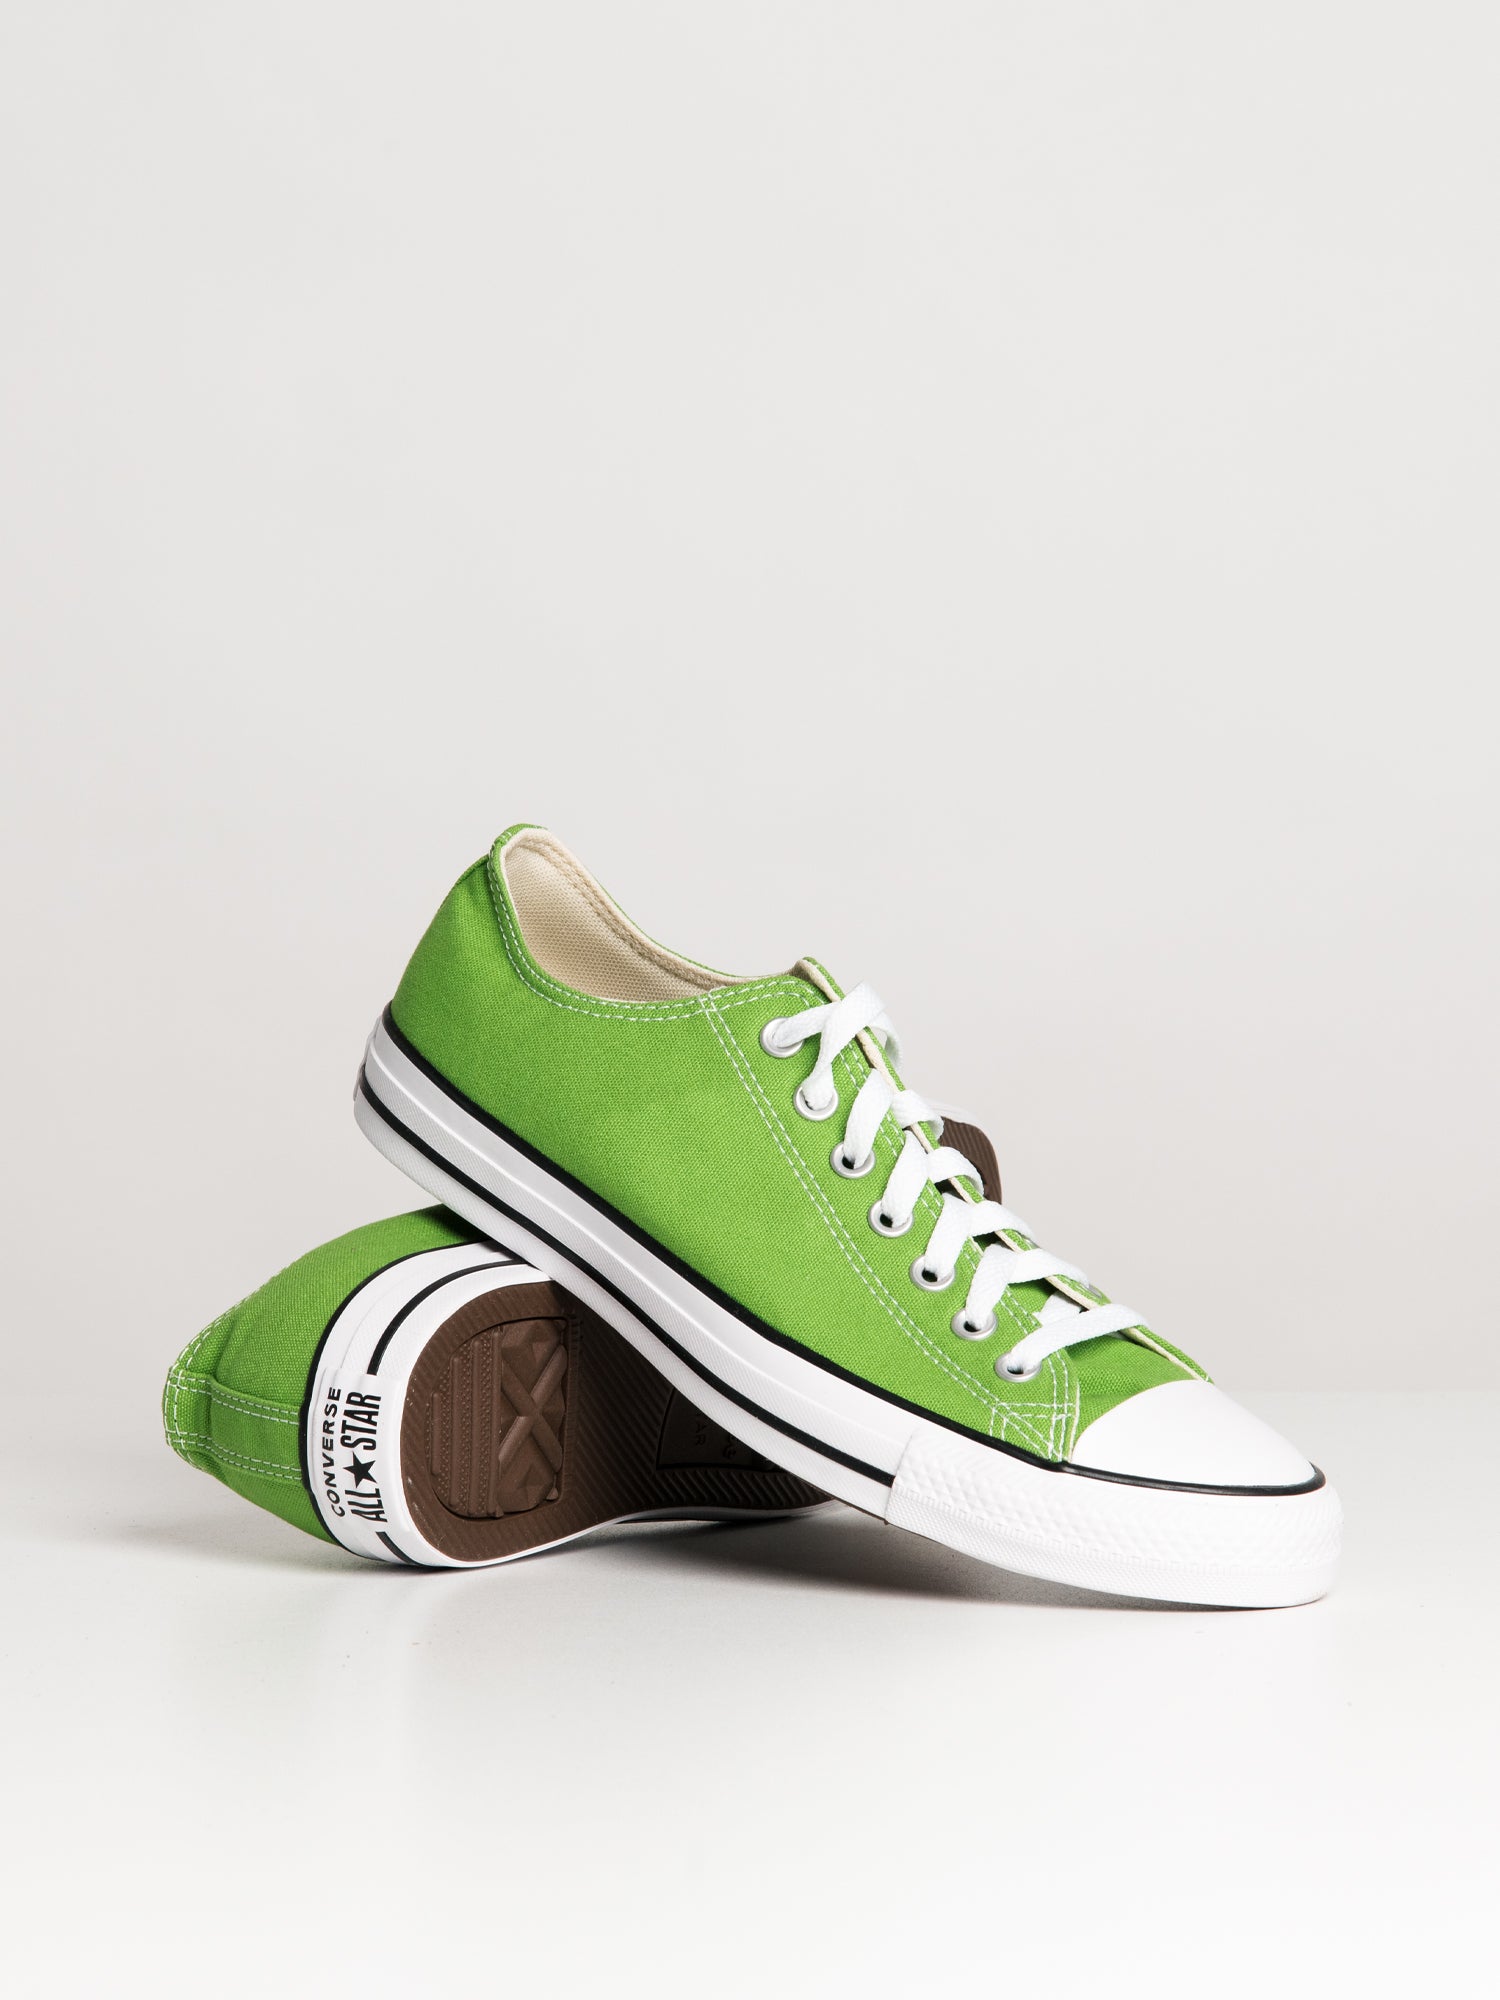 MENS CONVERSE CHUCK TAYLOR ALL-STARS OX - CLEARANCE